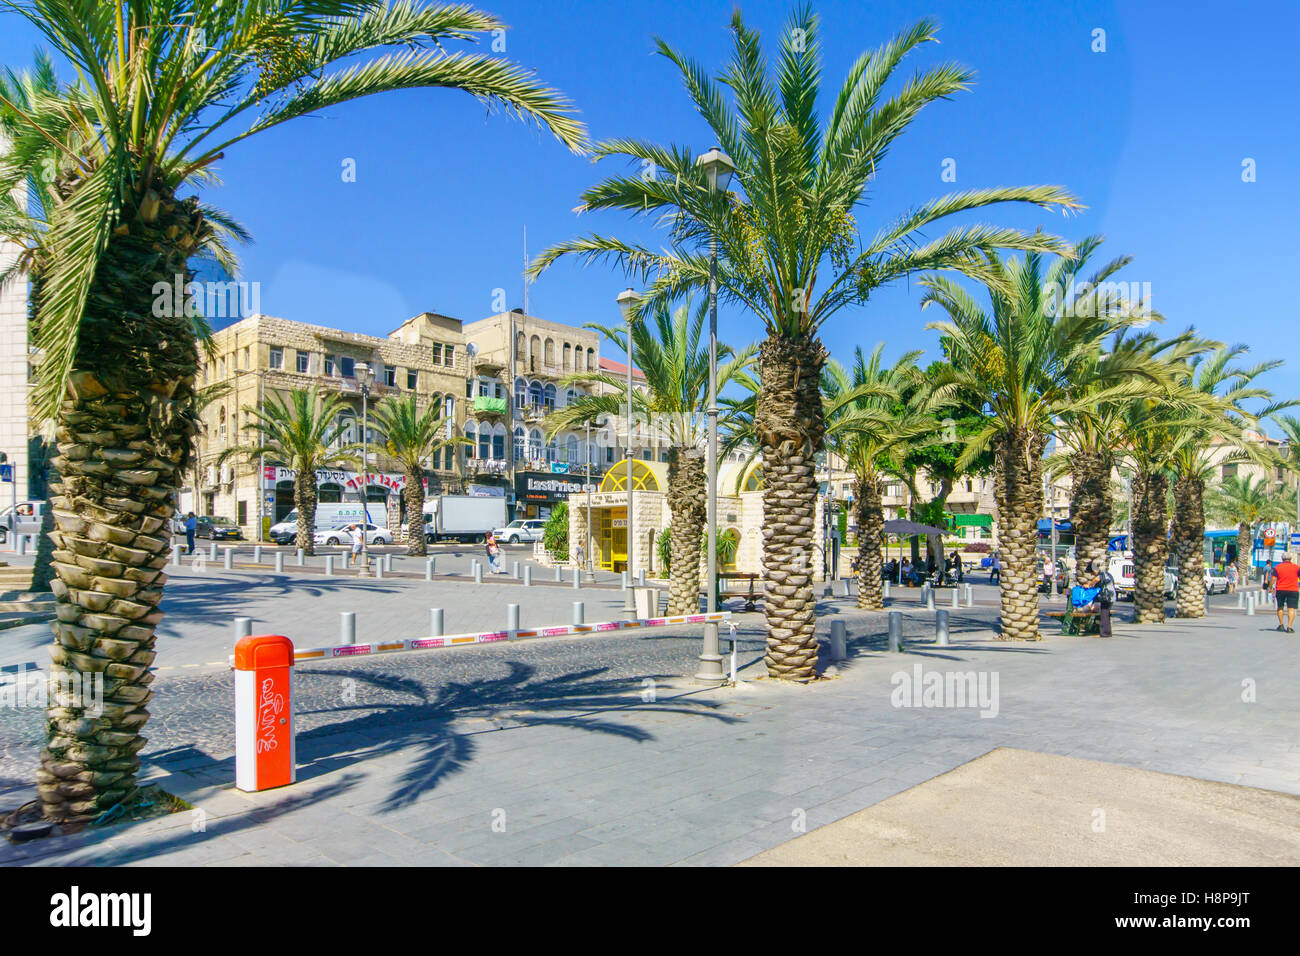 HAIFA, ISRAEL - JULY 21, 2015: Scene of Paris square, and its subway (Carmelit) station, with local and visitors. It is one of t Stock Photo